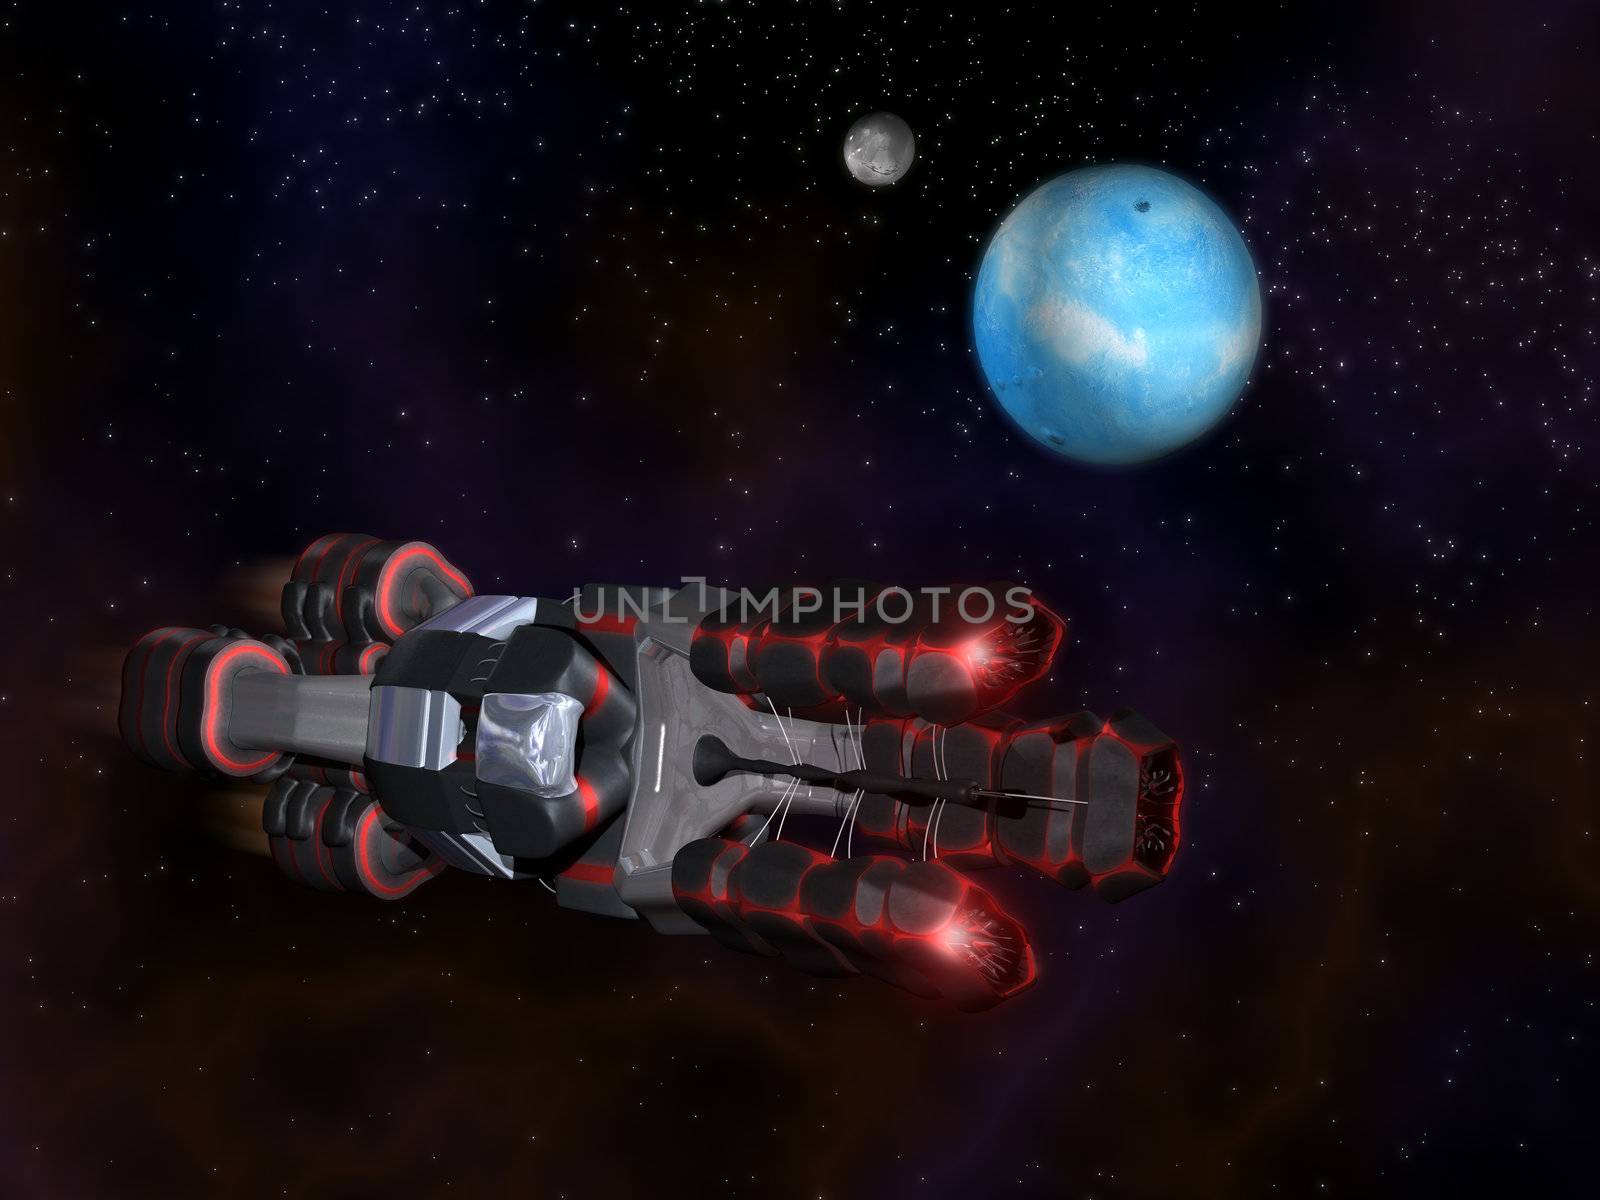 Side view of Black and Red Space Craft in Action in Space by shkyo30